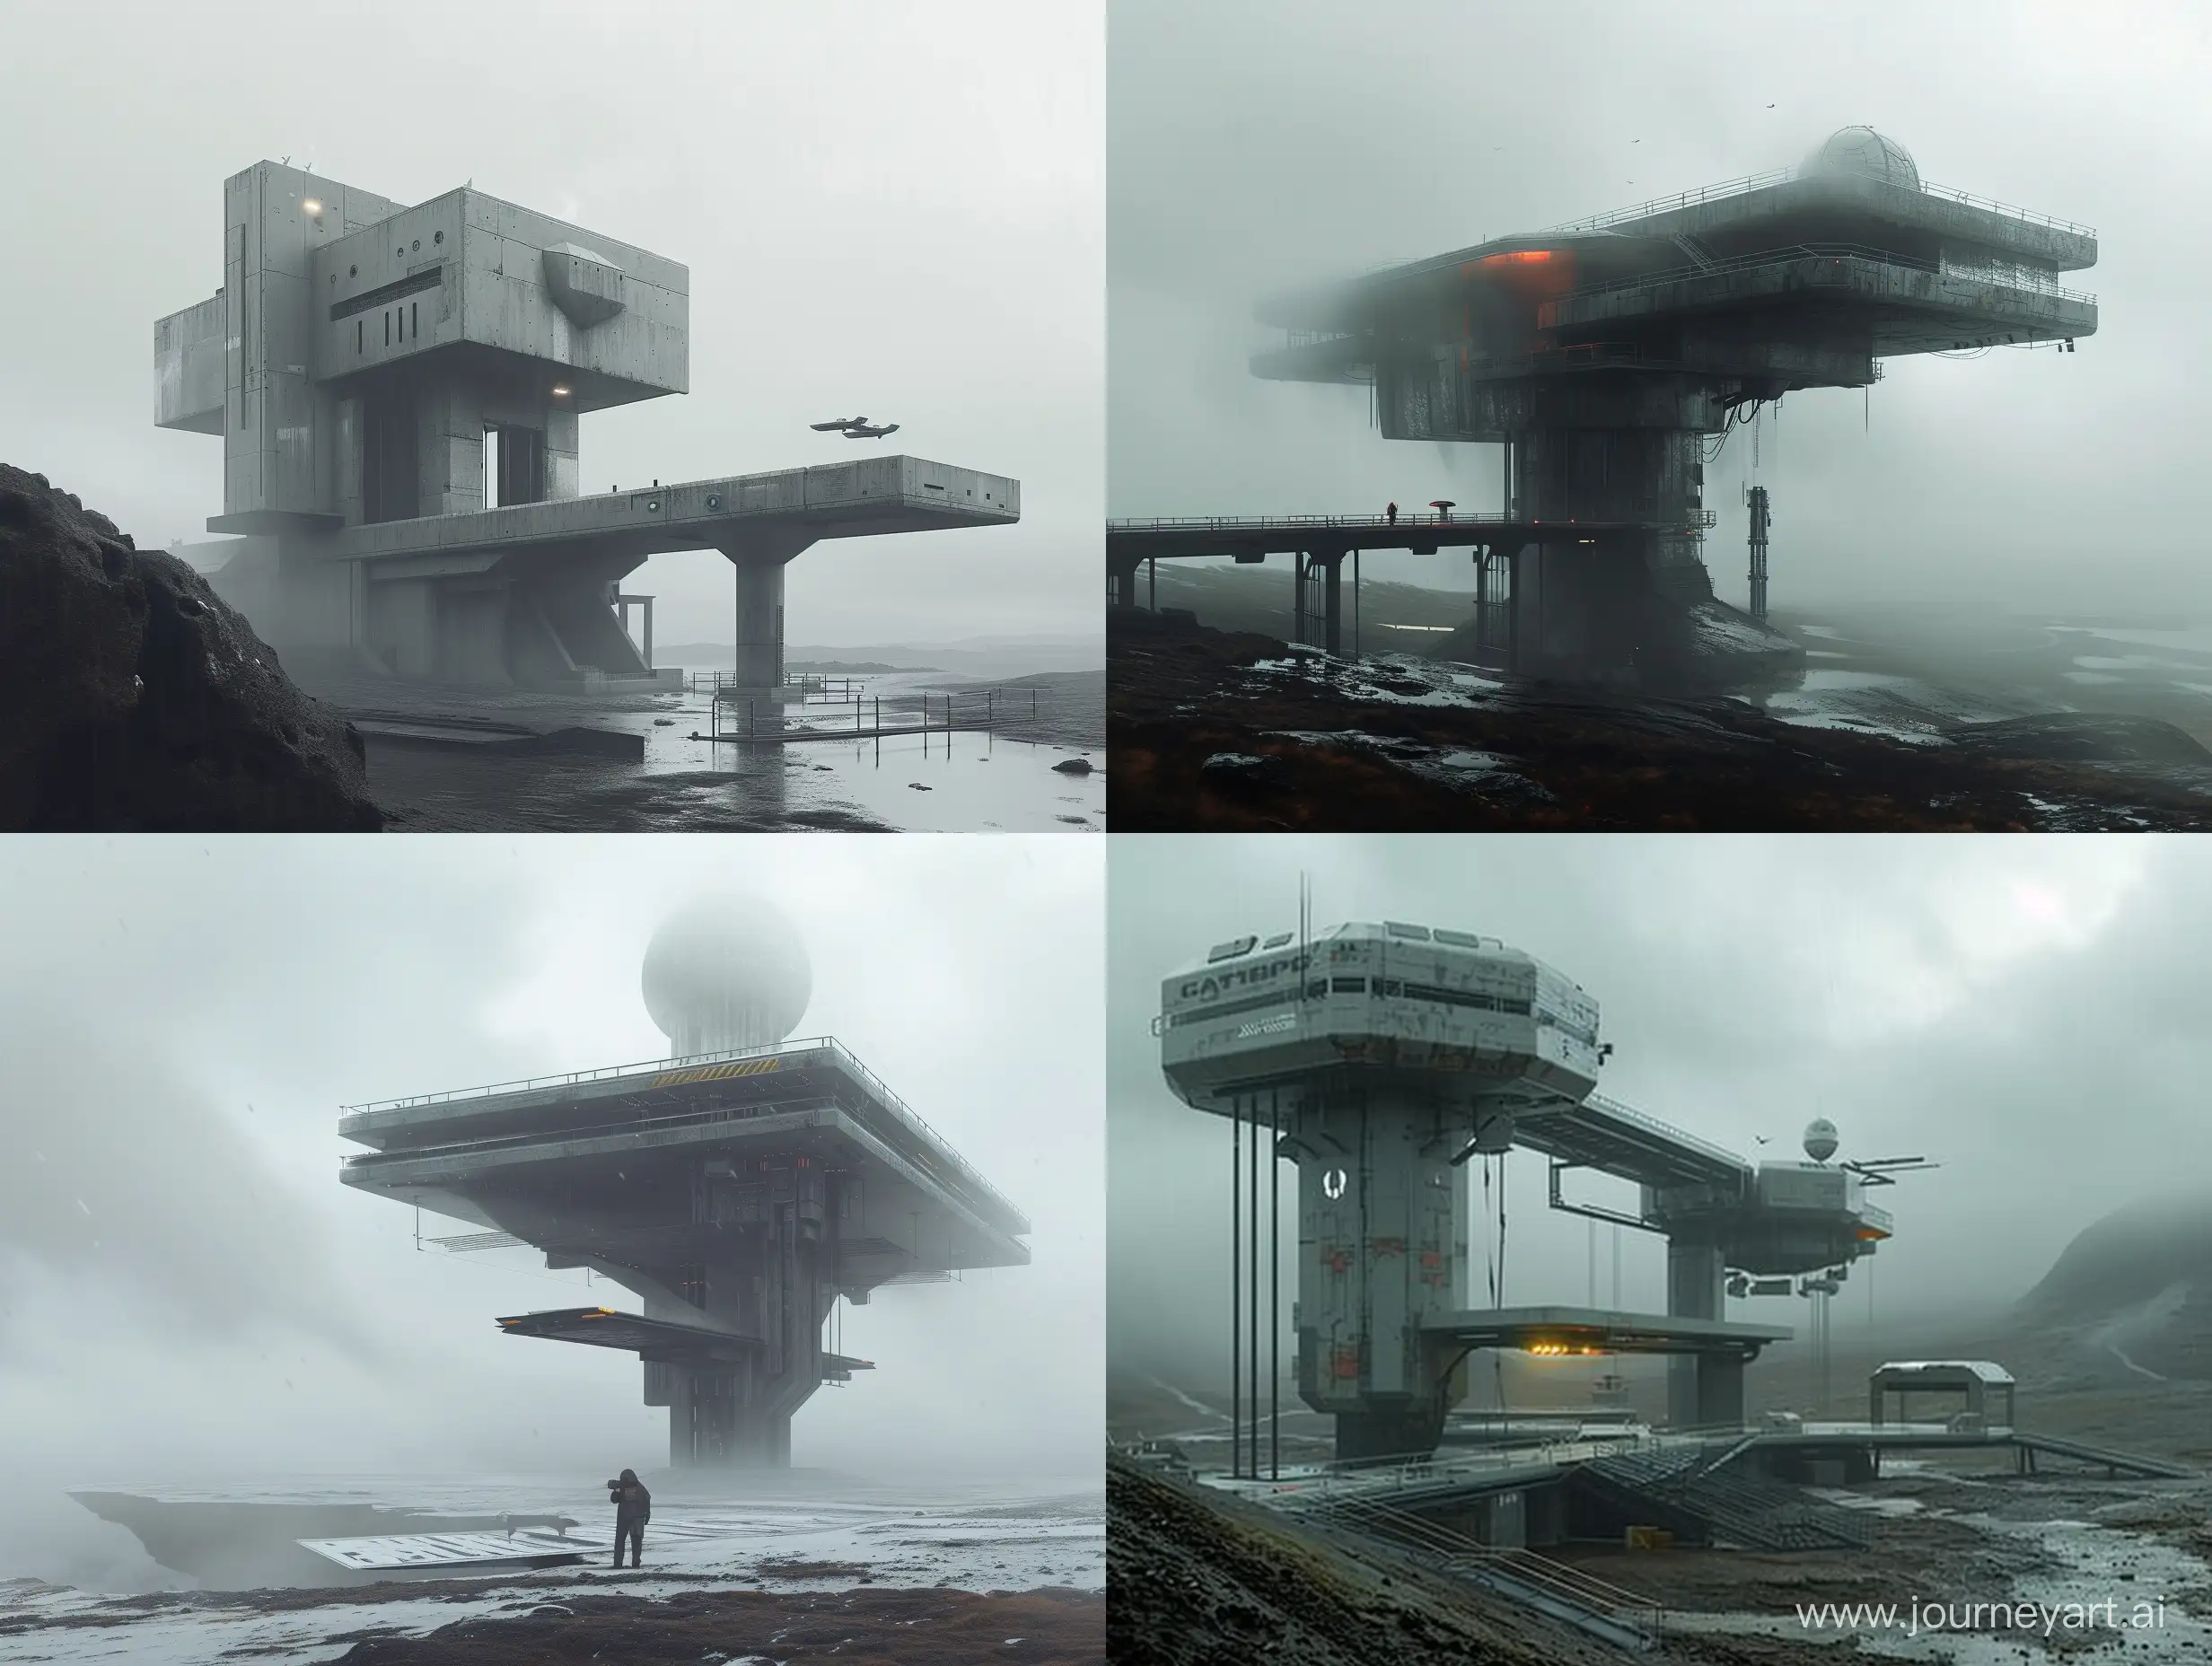 Concept art for the game, scp concept, overcast weather, bioarchitecture, sci fi base, outpost with landing pad, modernism

